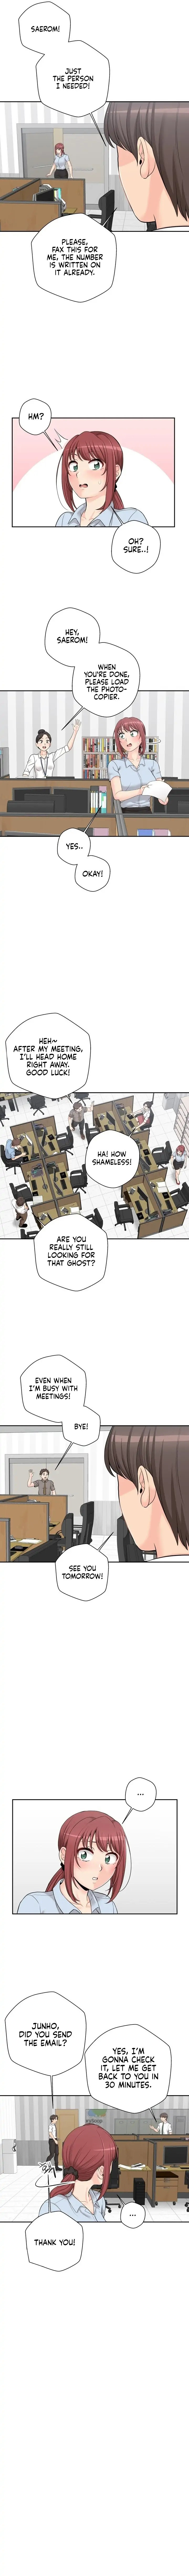 The OL’s Secret Account - Chapter 4 Page 6